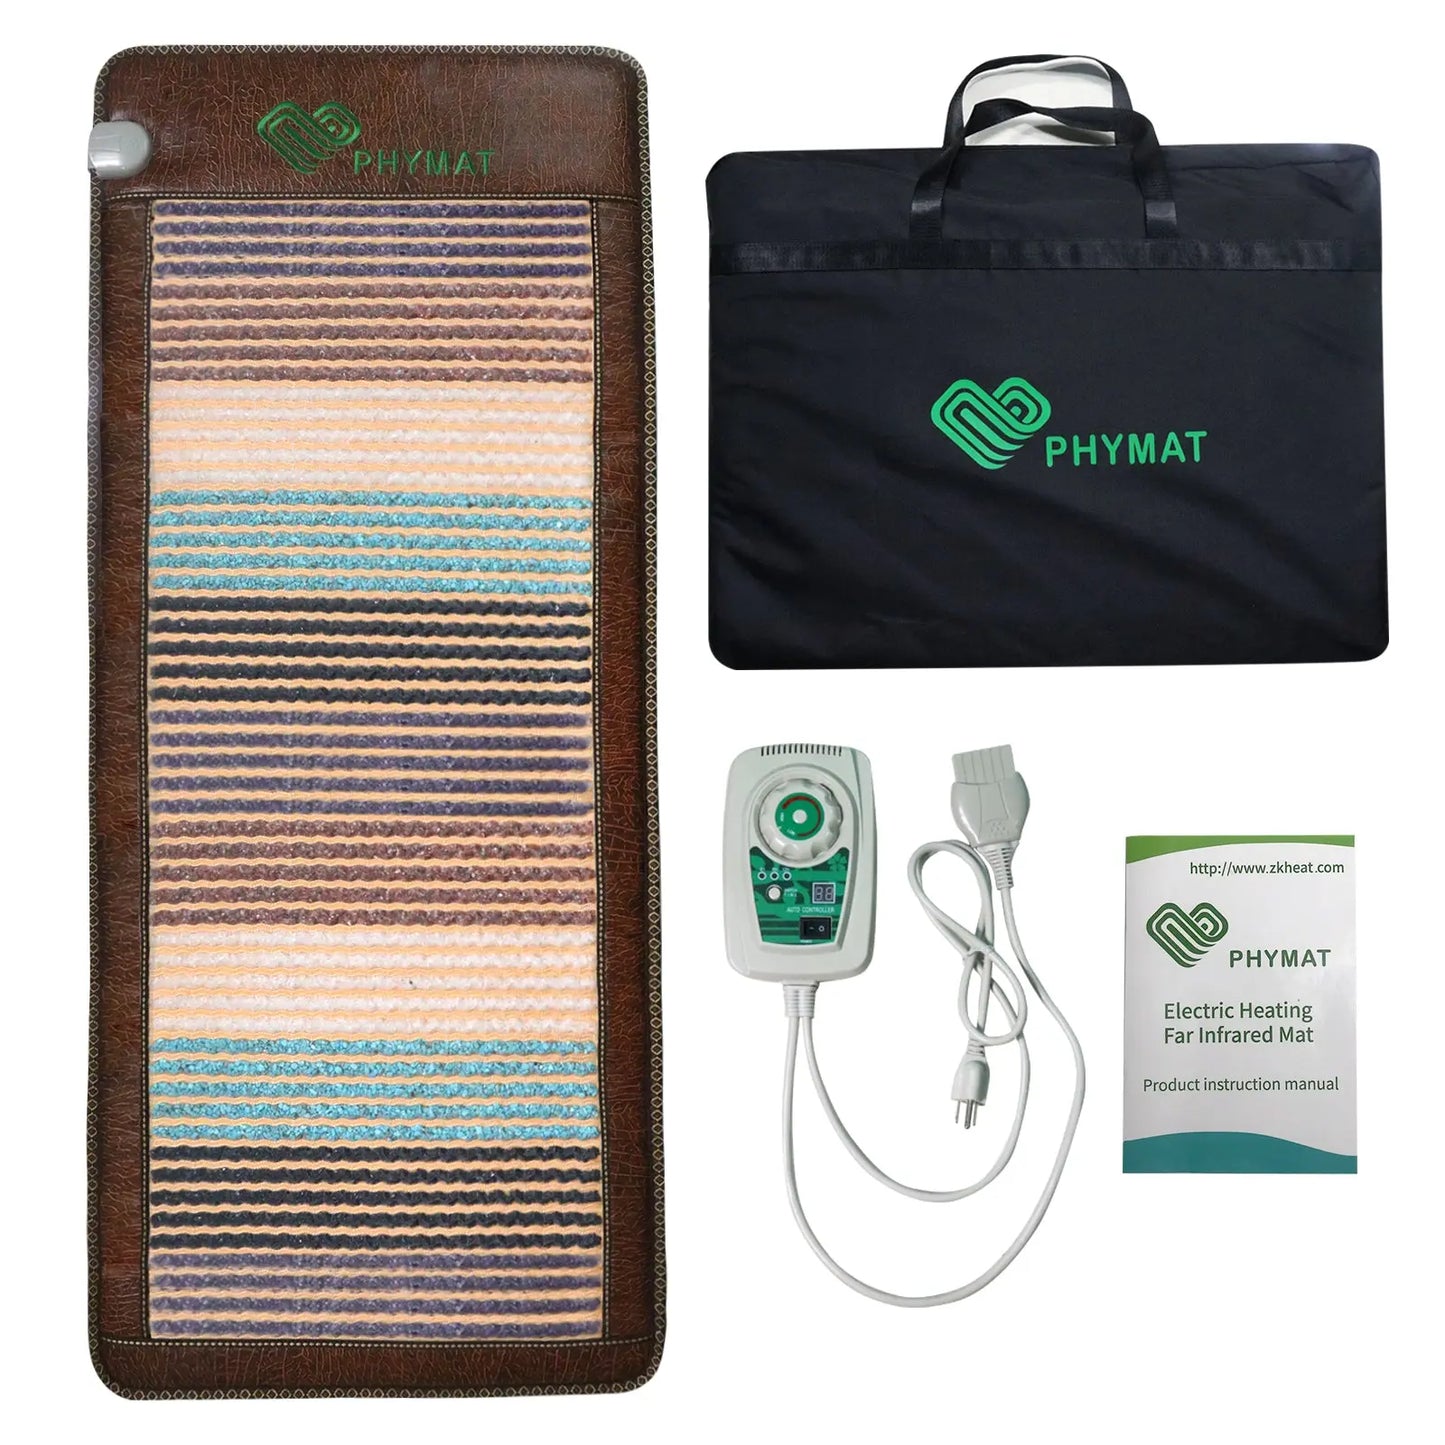 PHYMAT Amethyst Far Infrared Heating Pad - 5 Color Natural Gemstones Heating Pad (67"x27") PHYMAT Life